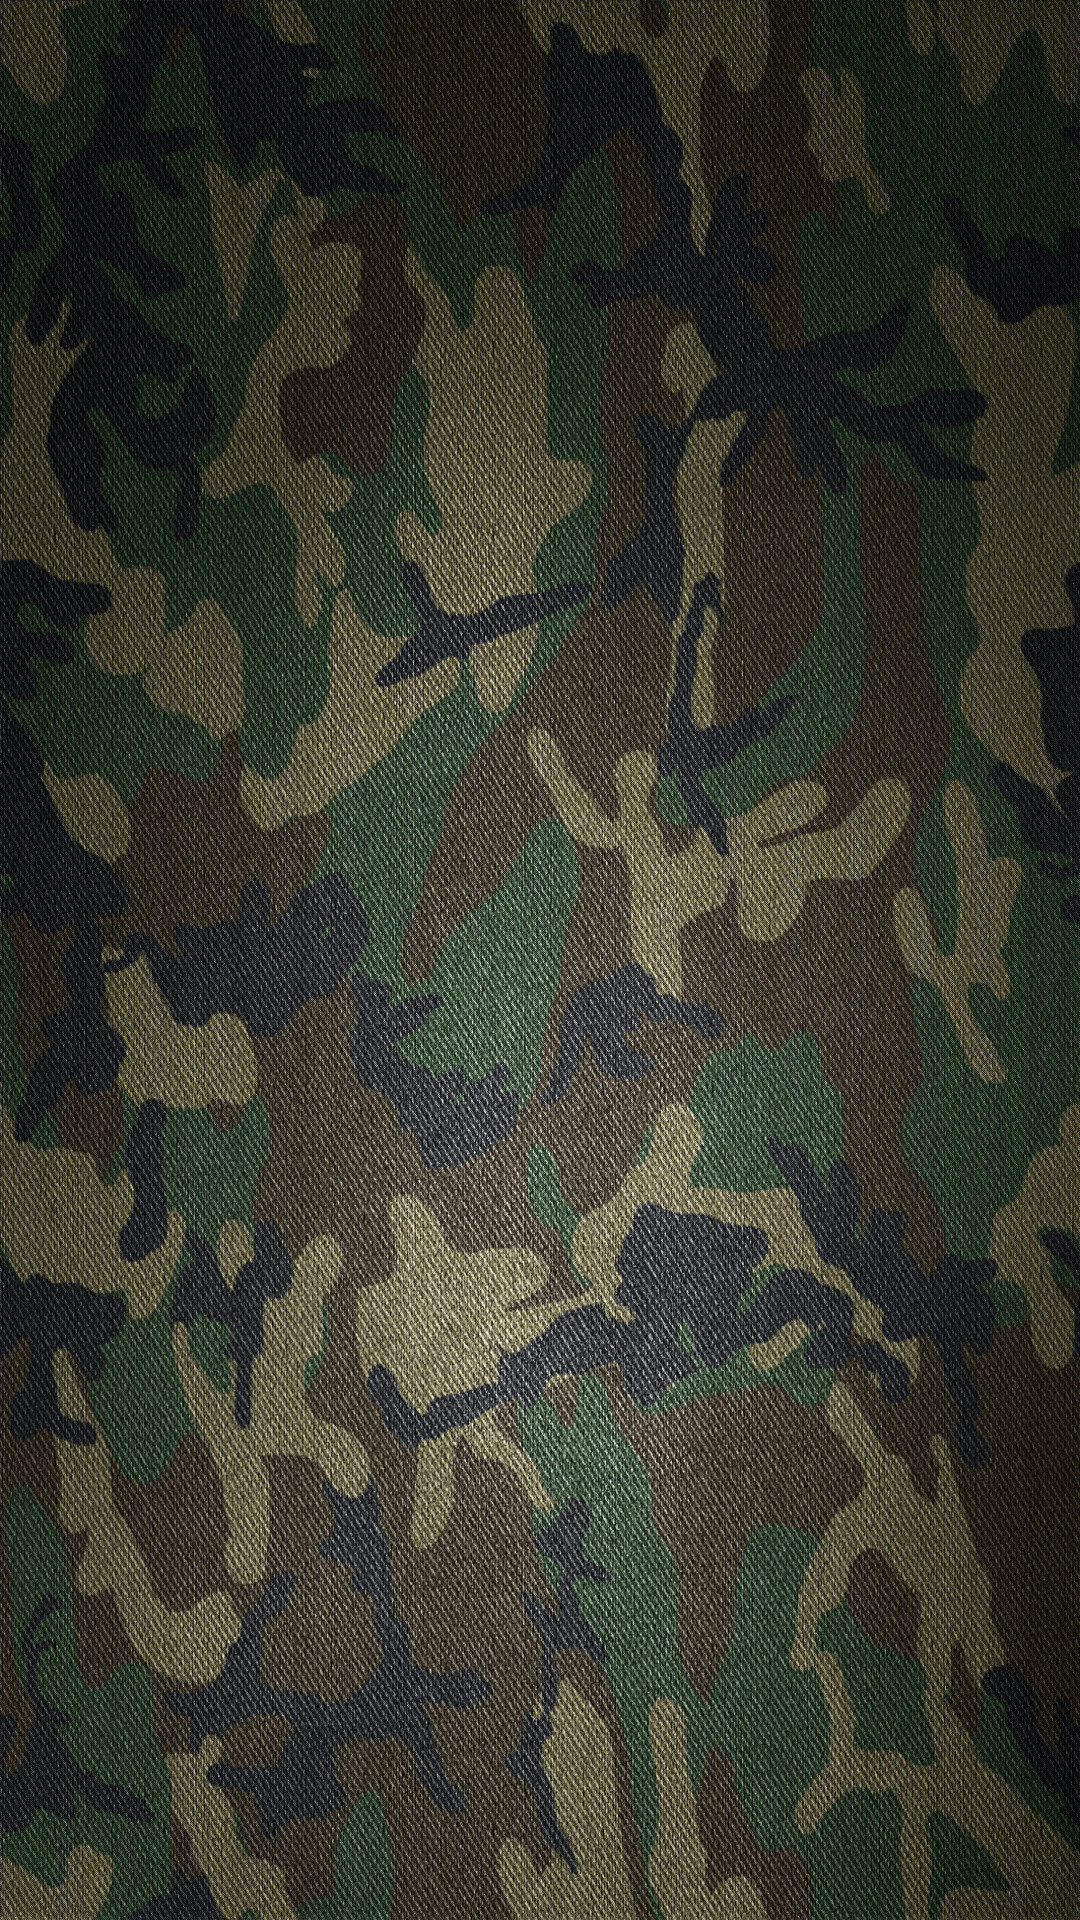 cool camo wallpapers,military camouflage,camouflage,pattern,green,clothing